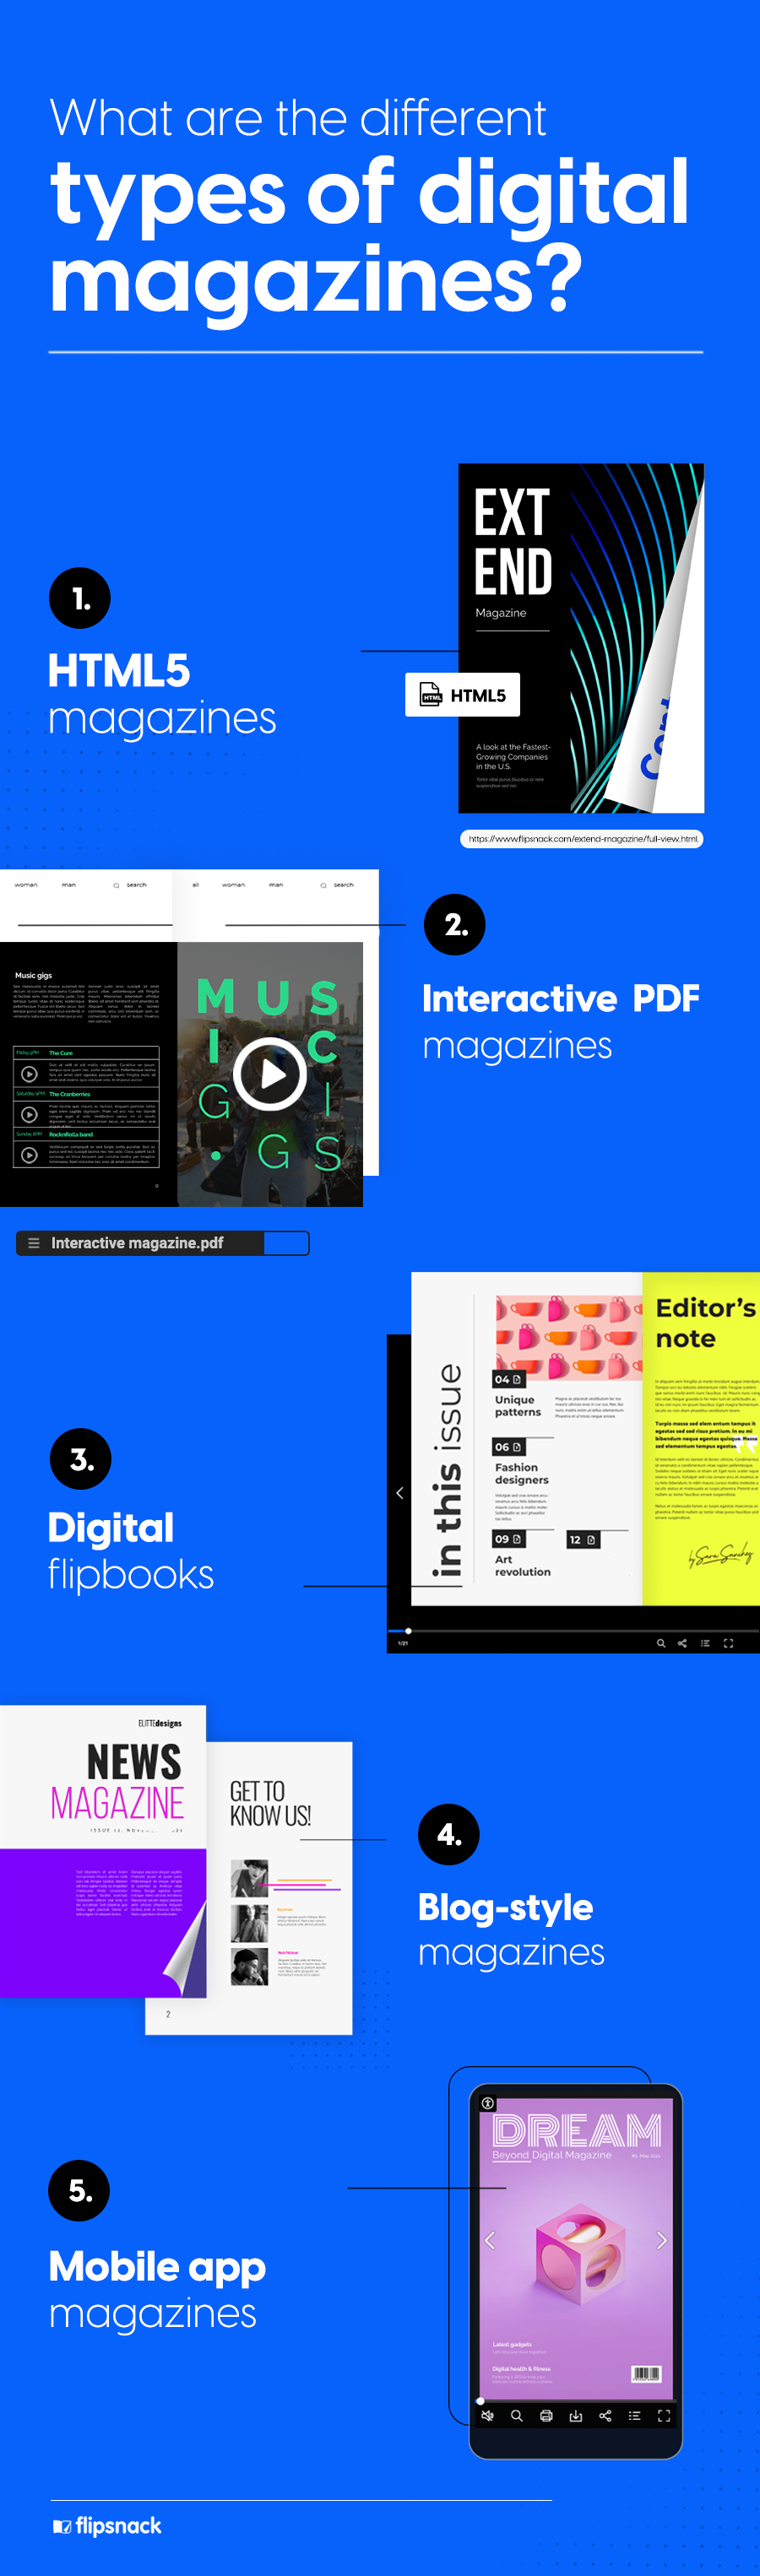 infographic on the different types of digital magazines